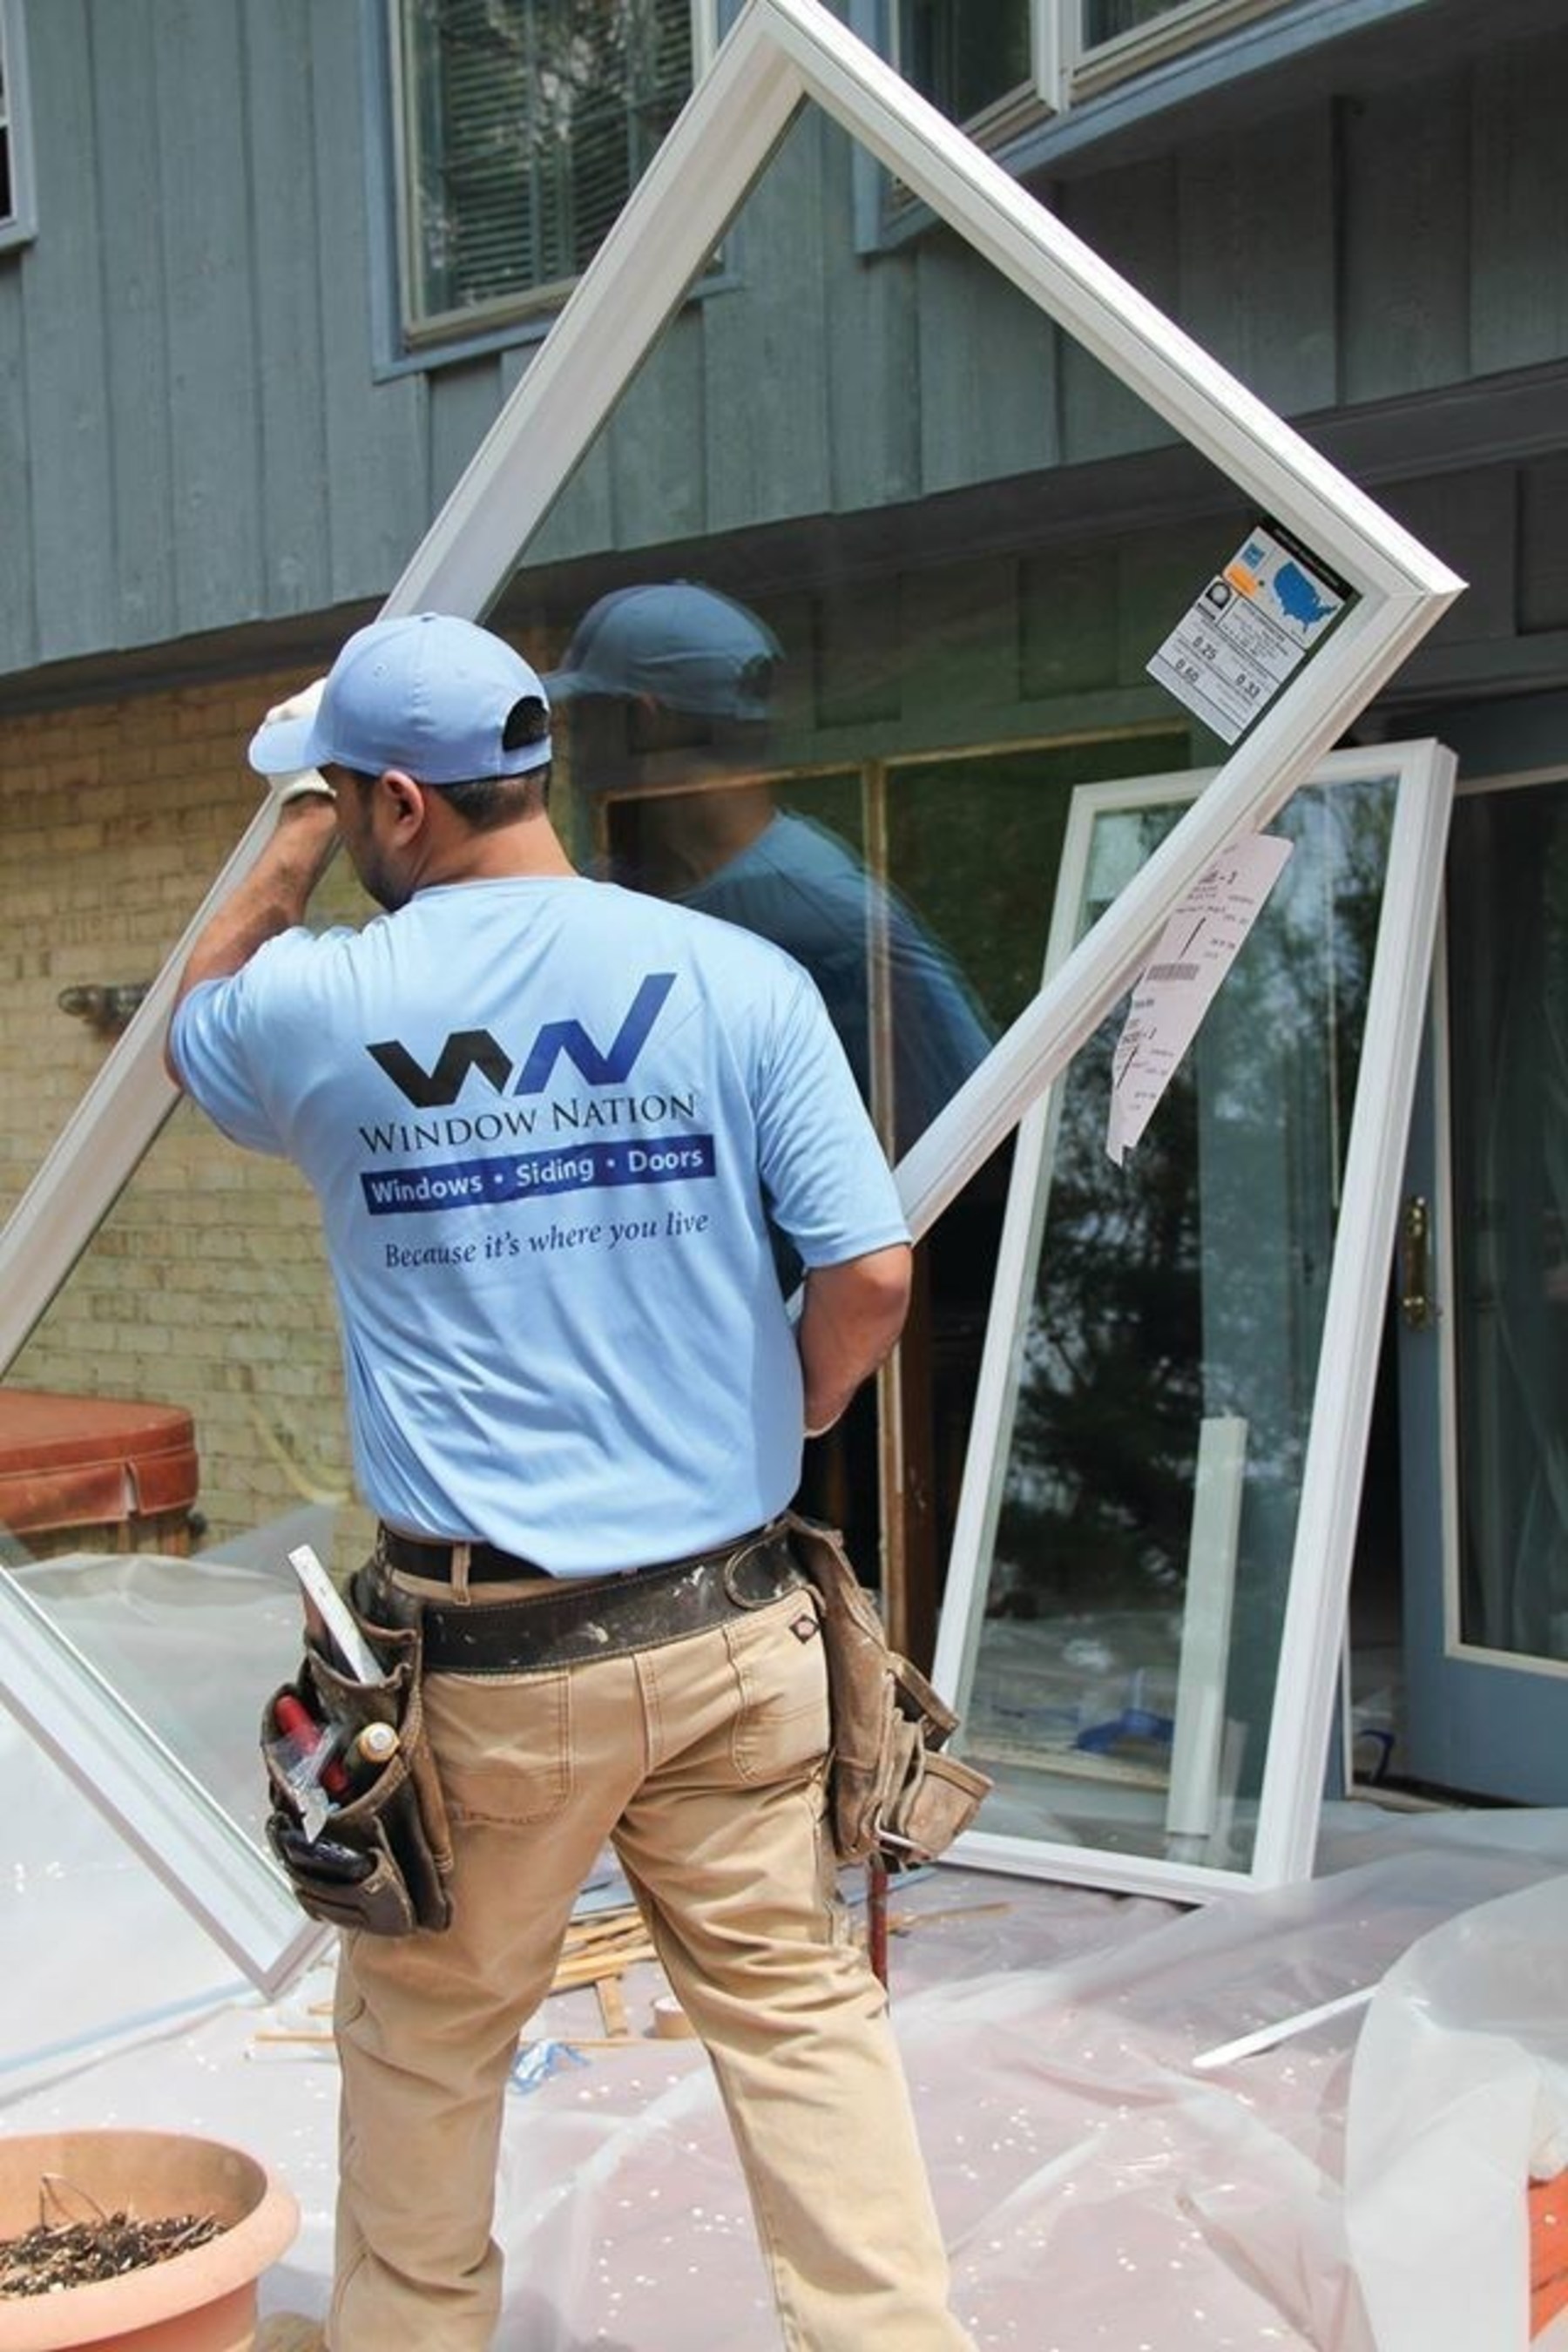 Window Nation, one of the country's leading window replacement companies, in now ranked #9 in the U.S. for home improvement due to growth, sales and customer satisfaction.